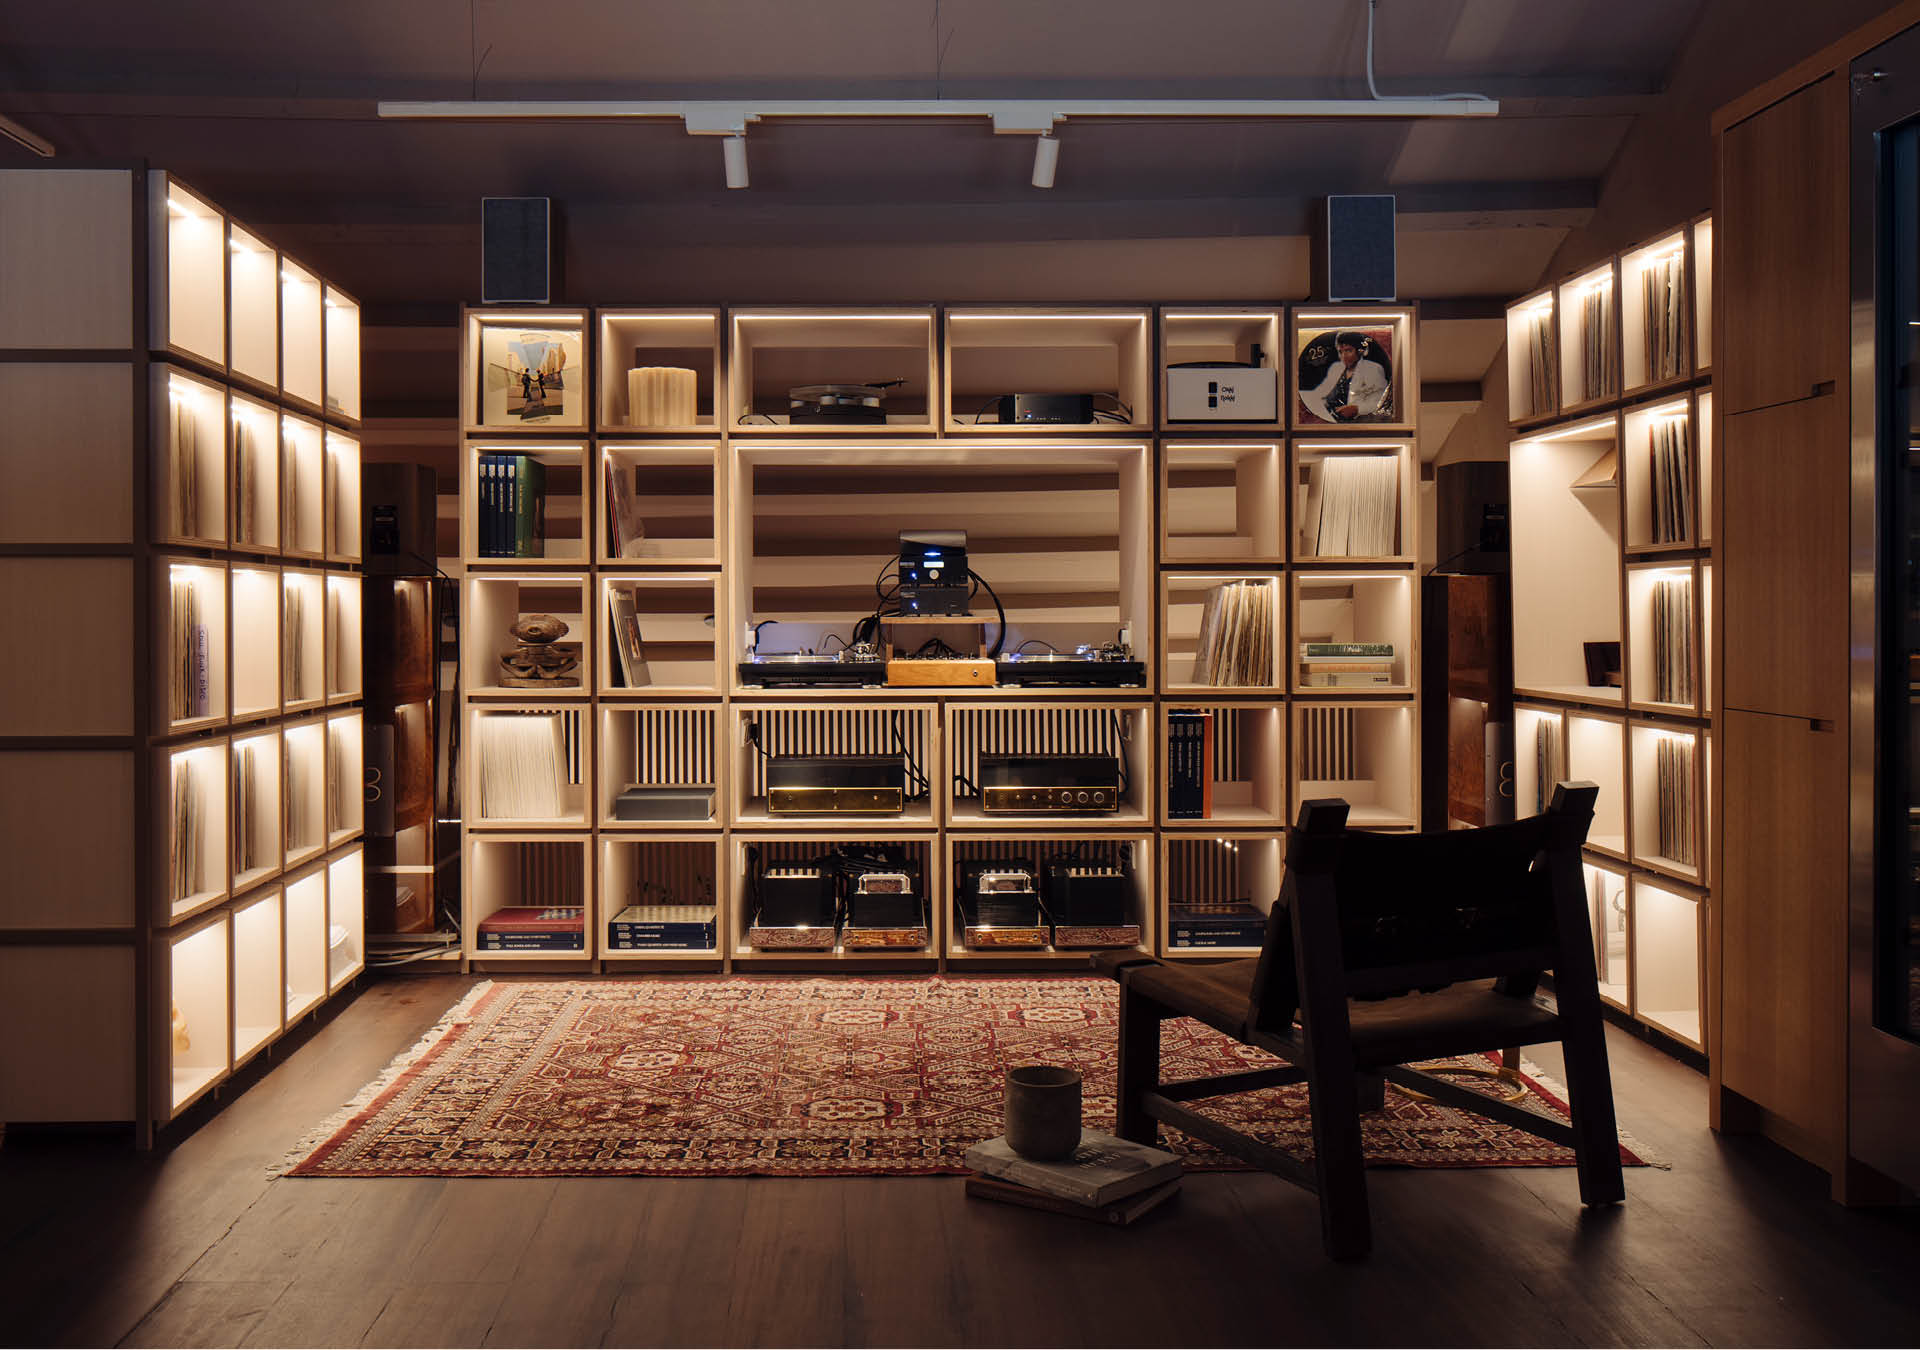 The listening room at Appetite in Singapore, where a lounge chair and rug face three shelving units.